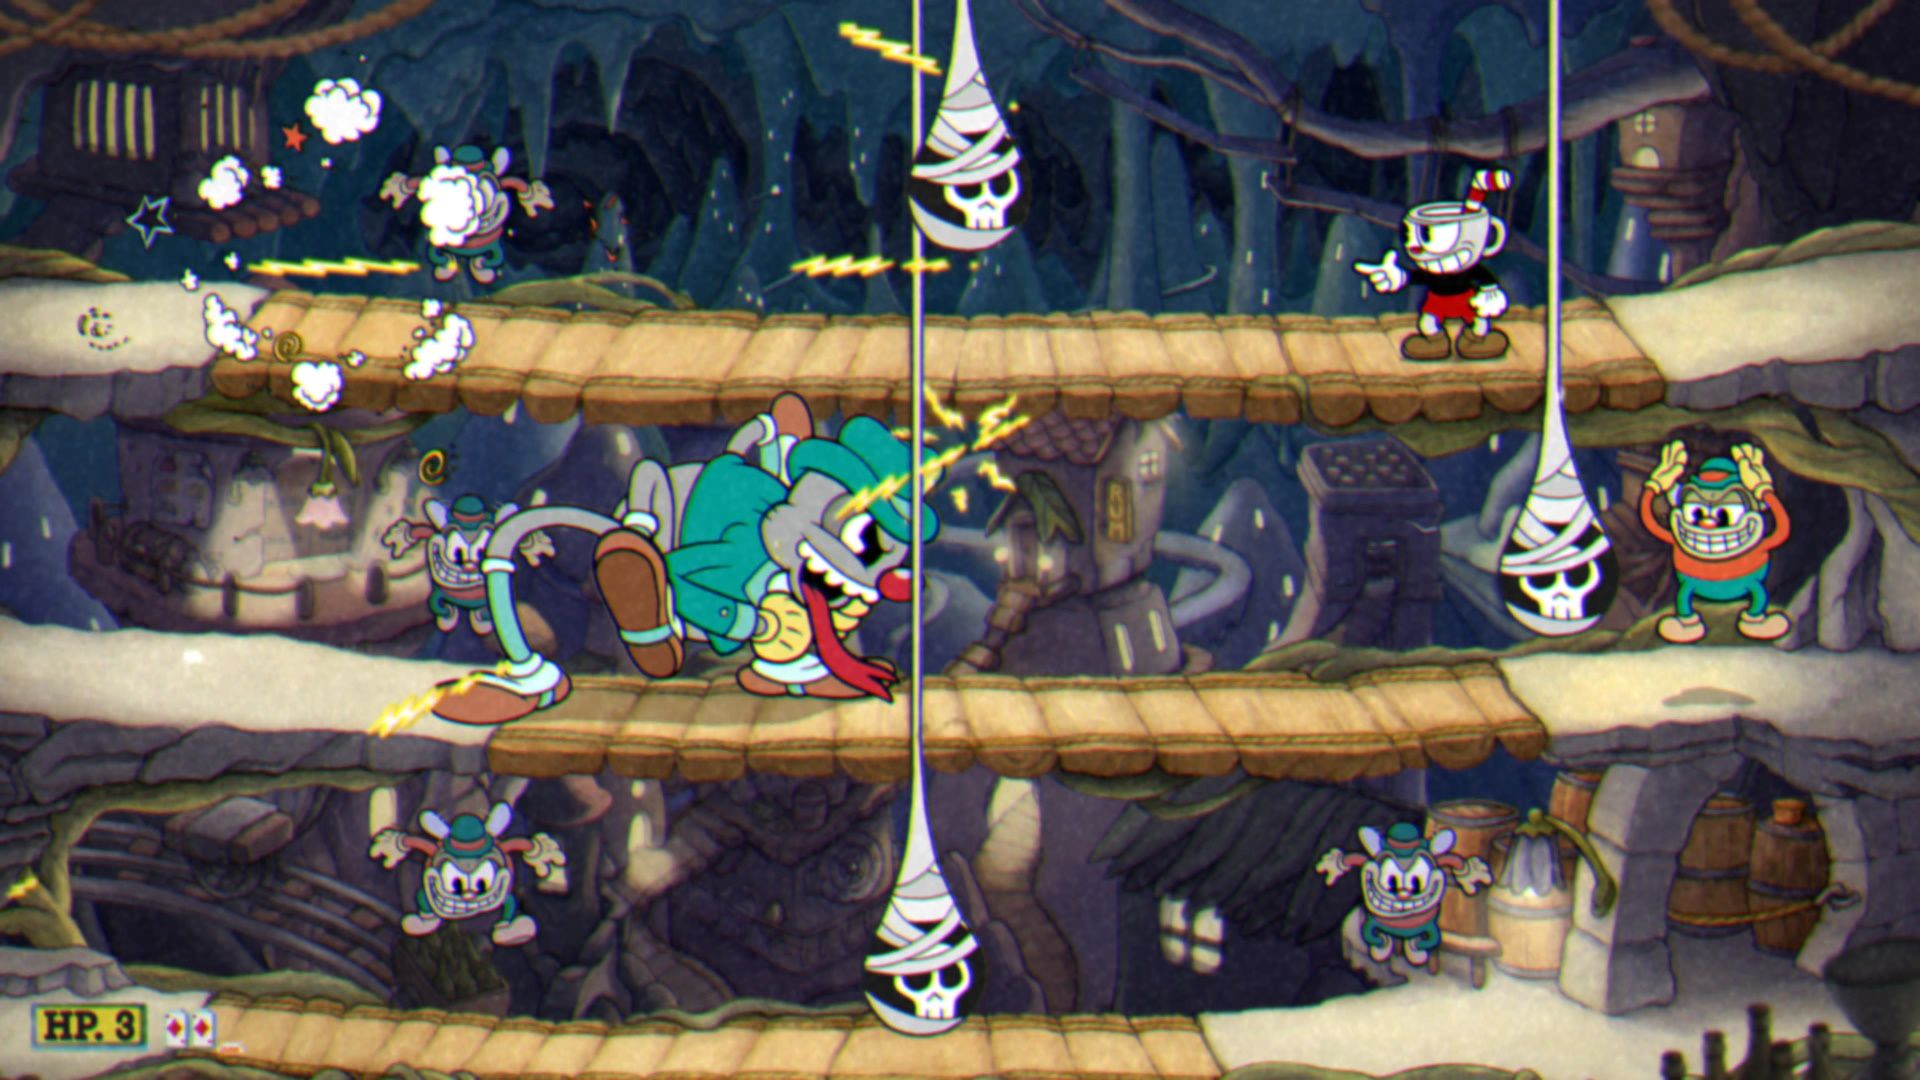 Cuphead The Delicious Course, The Moonshine Mob, Phase 1, Clearing out mobs with the Converge shot